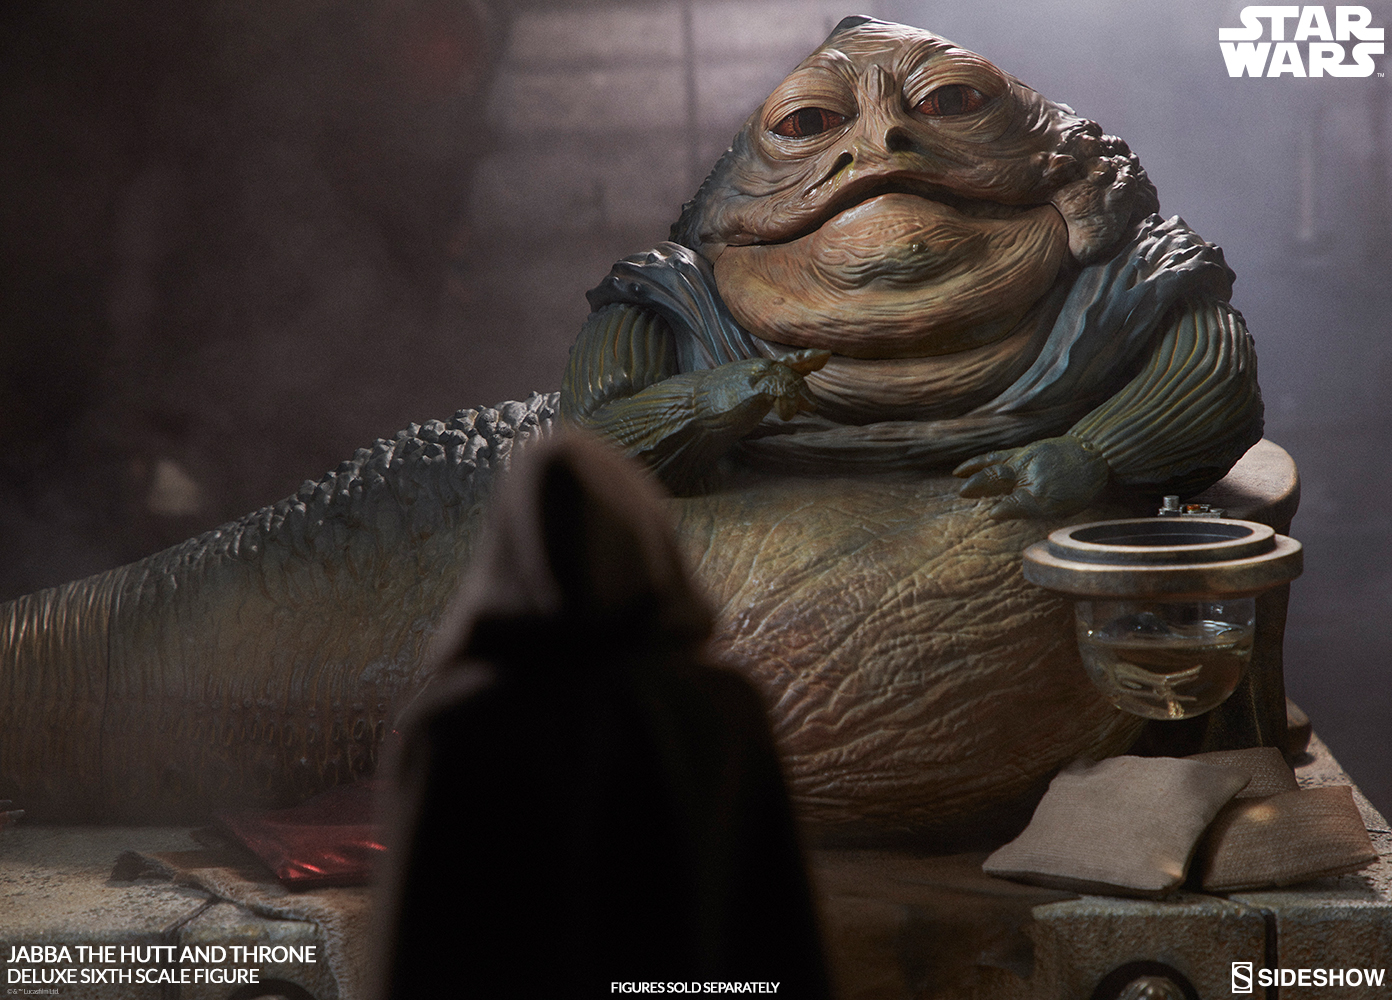 star-wars-jabba-the-hutt-and-throne-deluxe-sixth-scale-figure-sideshow-100410-32